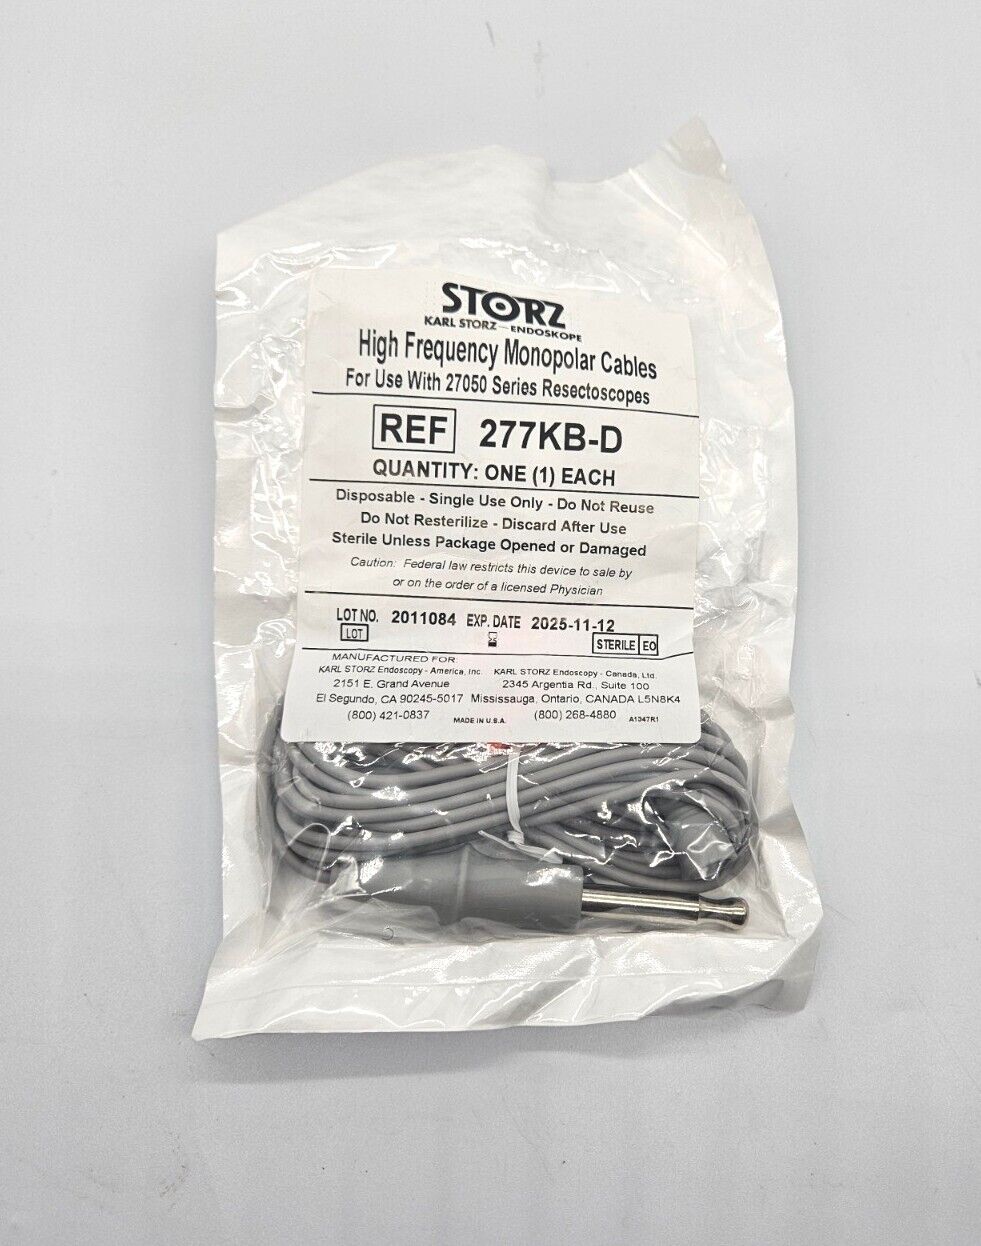 Karl Storz 277KB-D High Frequency Monopolar Cable for Resectoscopes